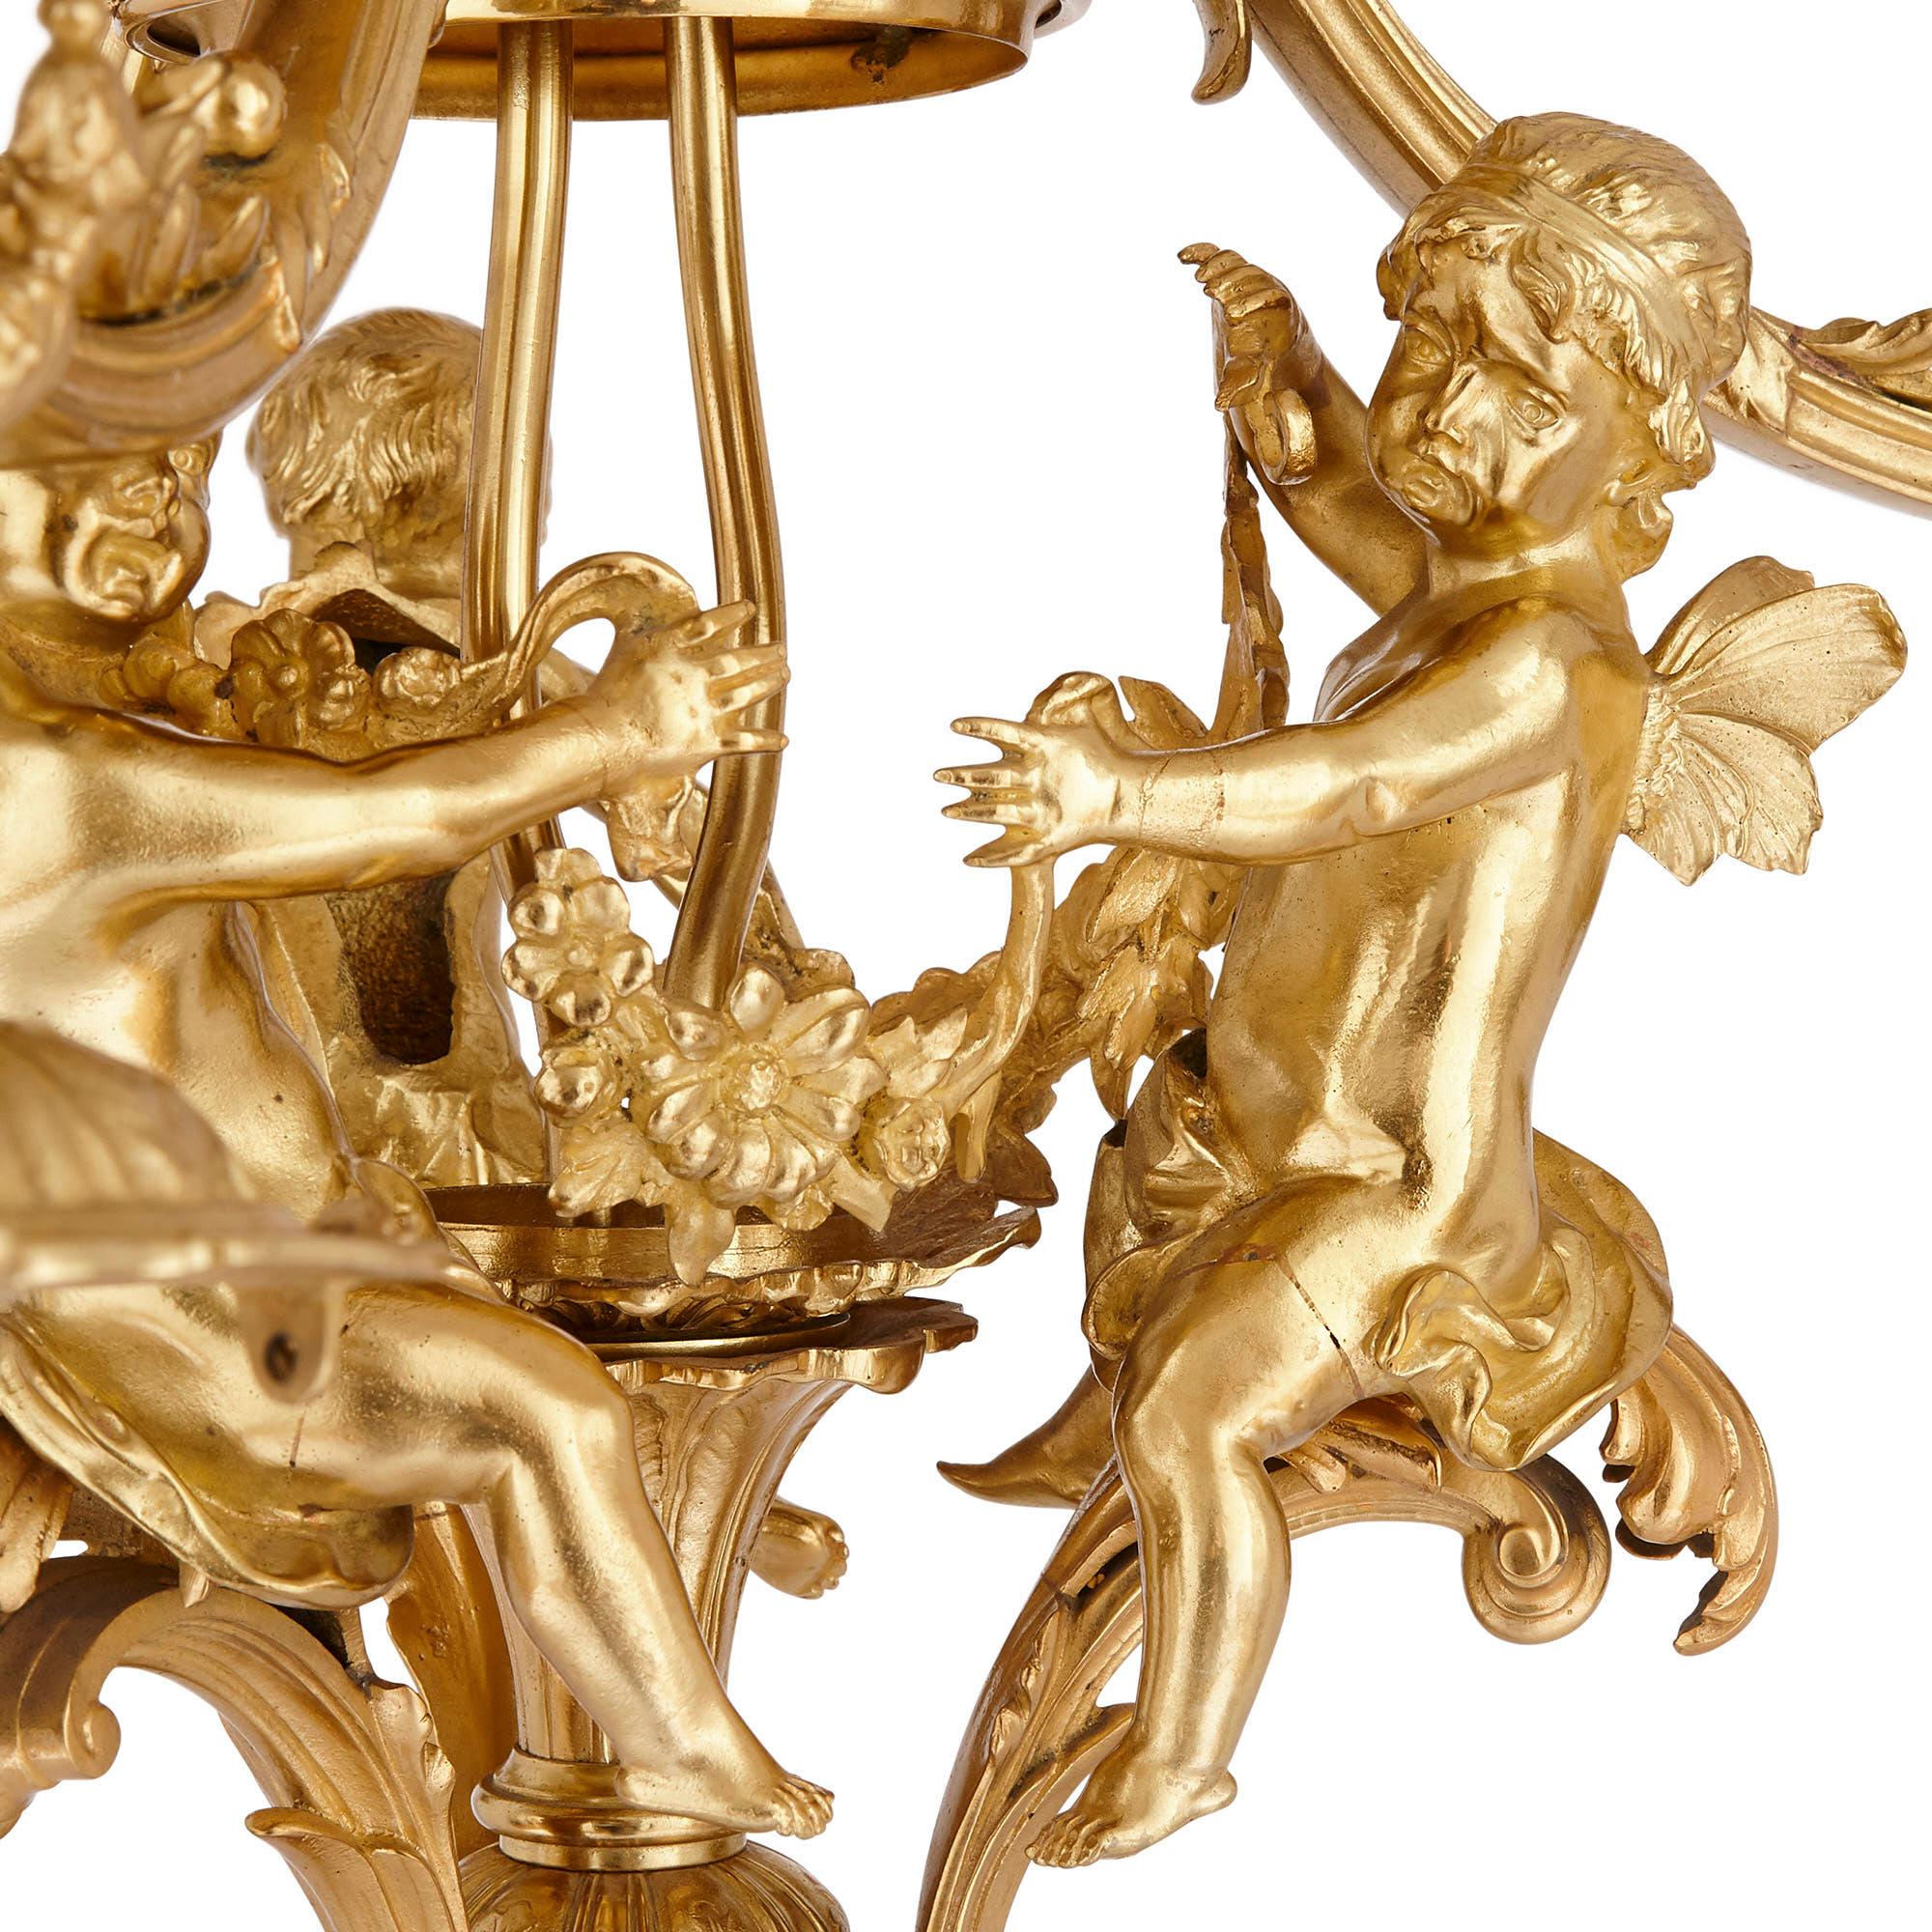 Designed during the sumptuous Belle Époque, this gilt bronze chandelier demonstrates the very best of the period.

The chandelier is supported by a central highly ornate gilt bronze stem. This stem supports the three light branches, each C-scroll